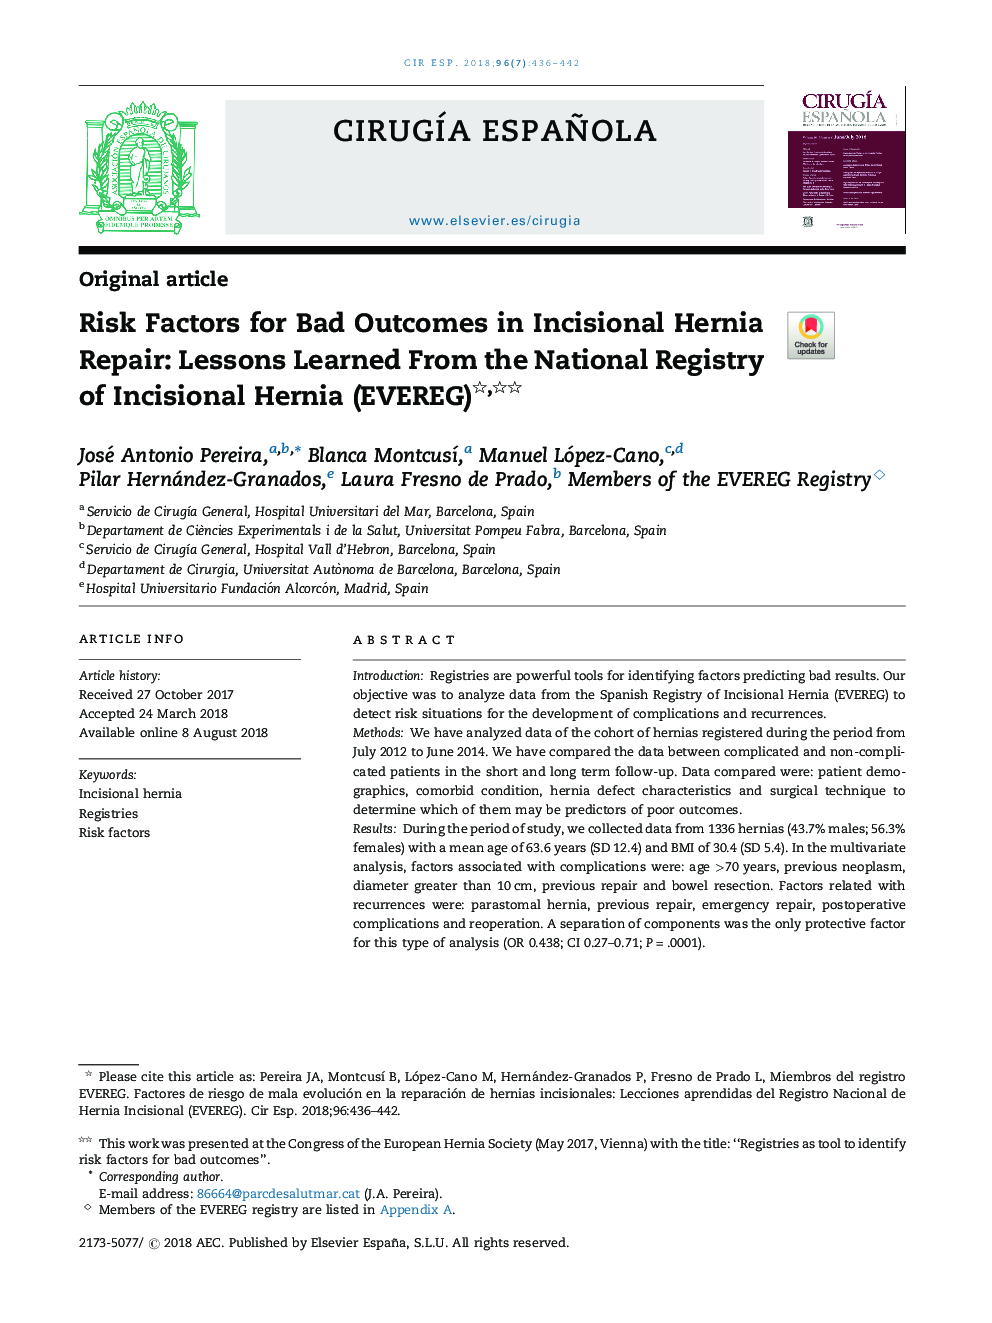 Risk Factors for Bad Outcomes in Incisional Hernia Repair: Lessons Learned From the National Registry of Incisional Hernia (EVEREG)